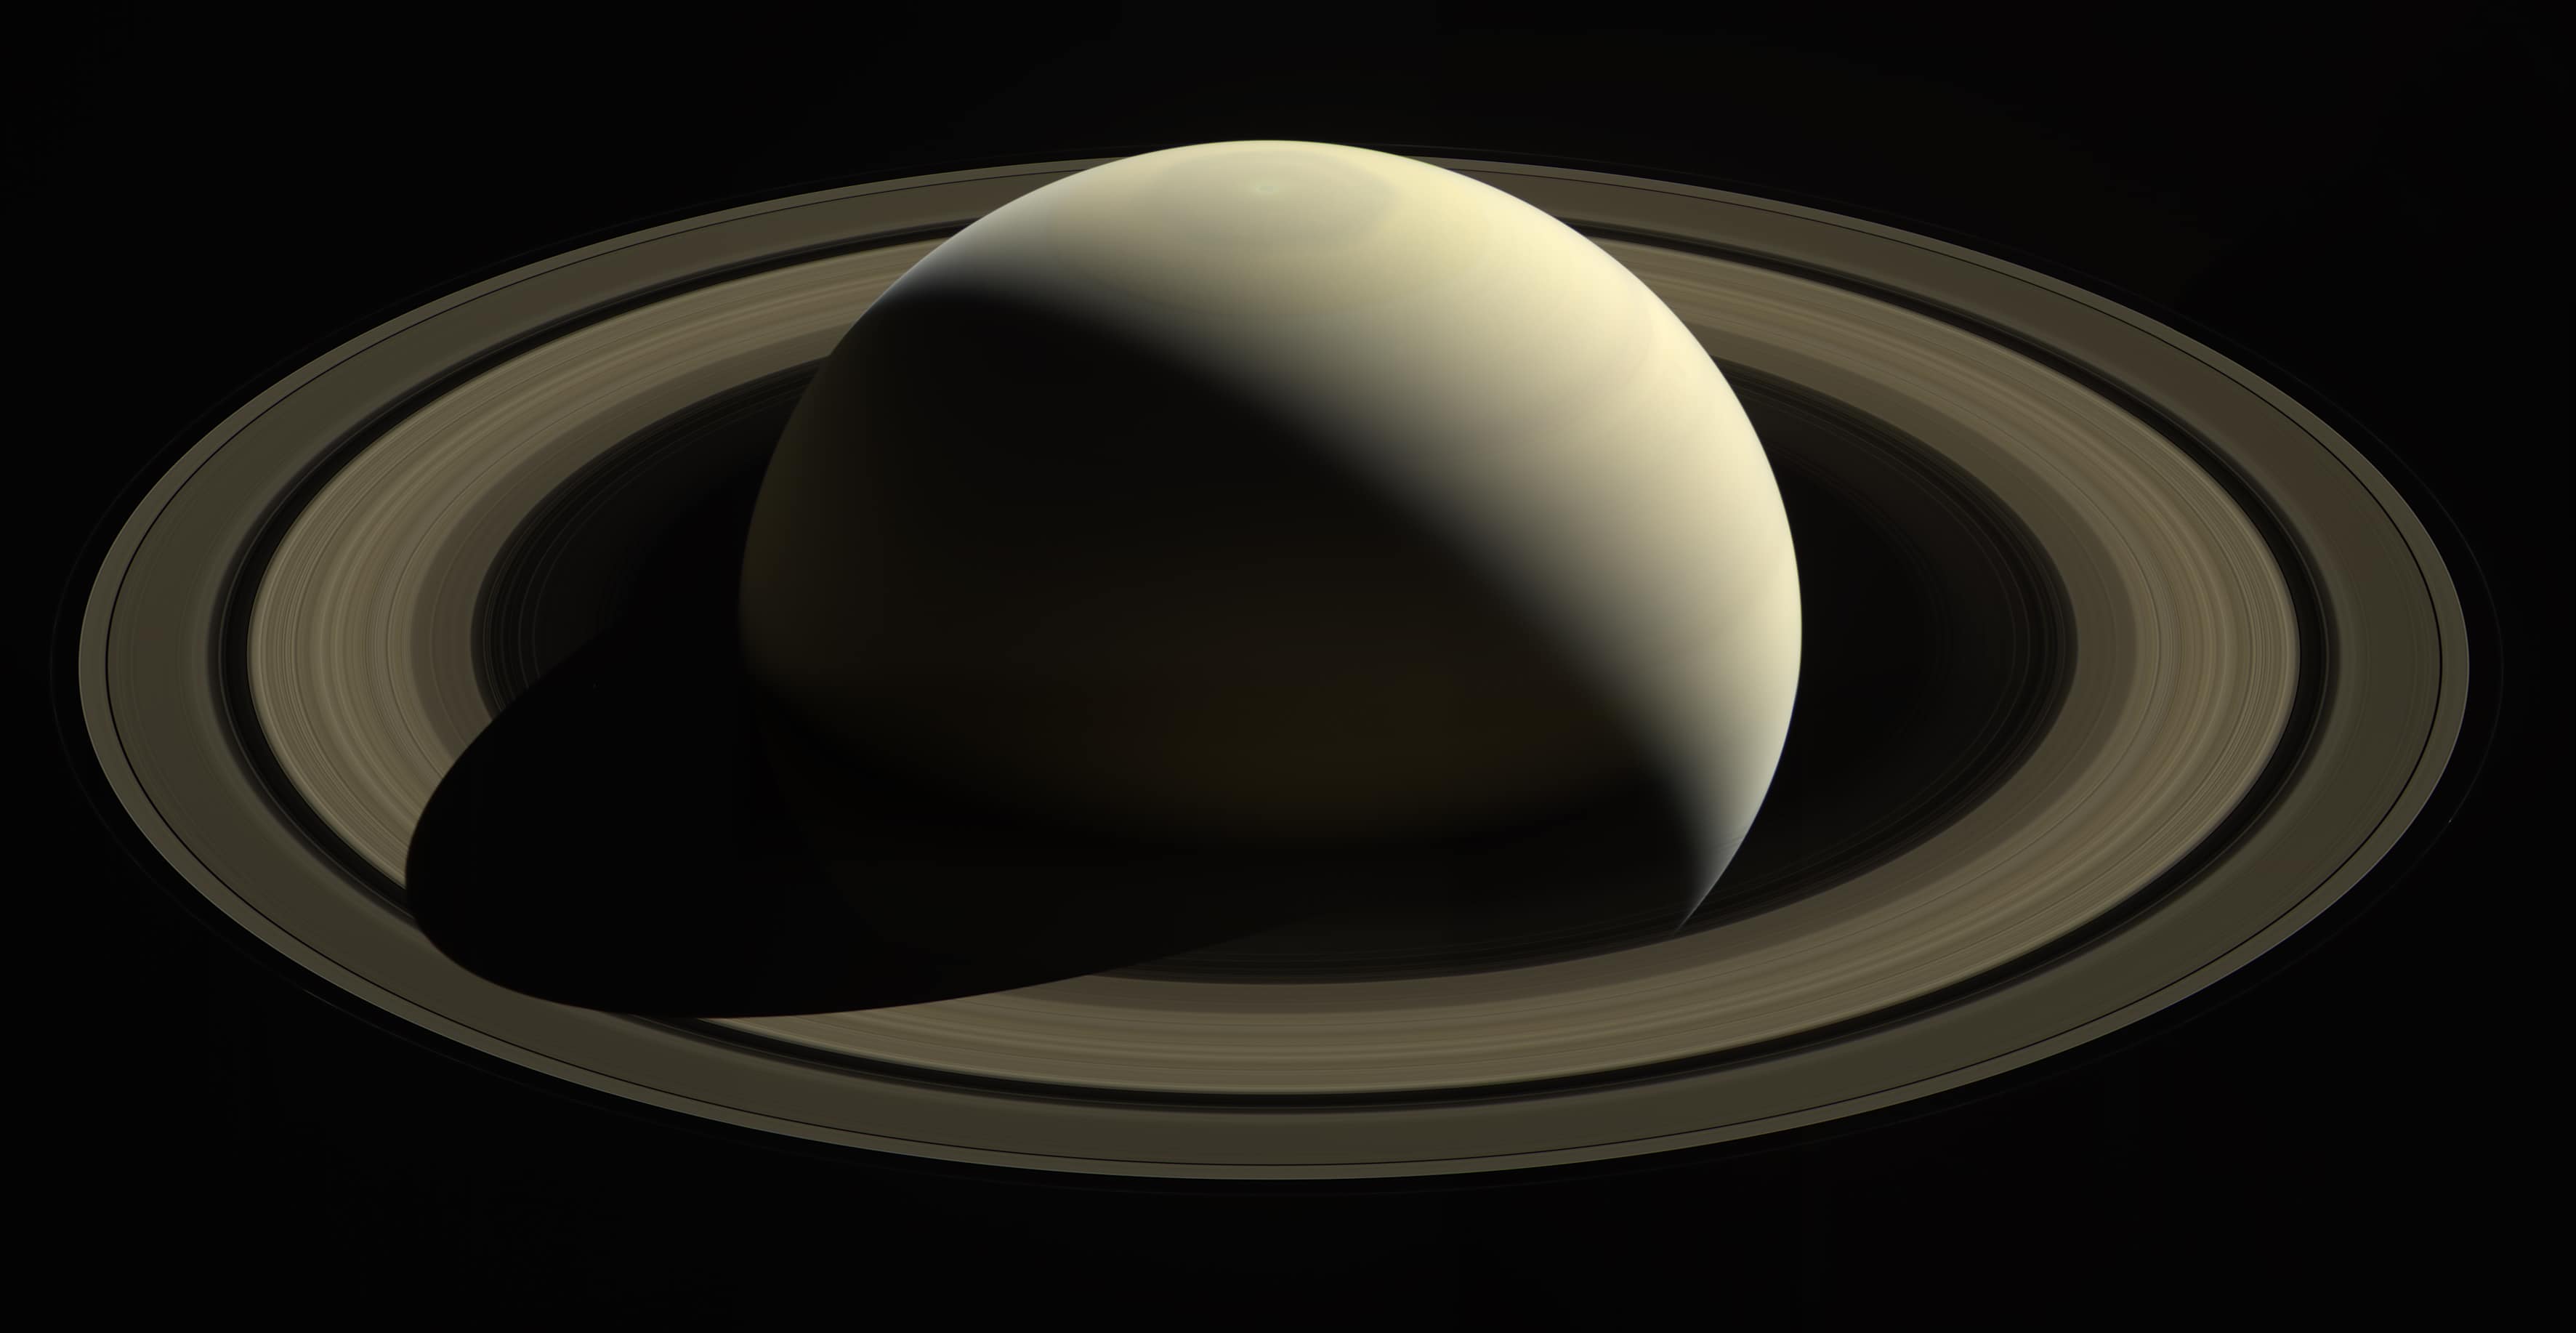 Before Burning Up in Saturn's Atmosphere, This is Cassini's Last Photo After 13 Years